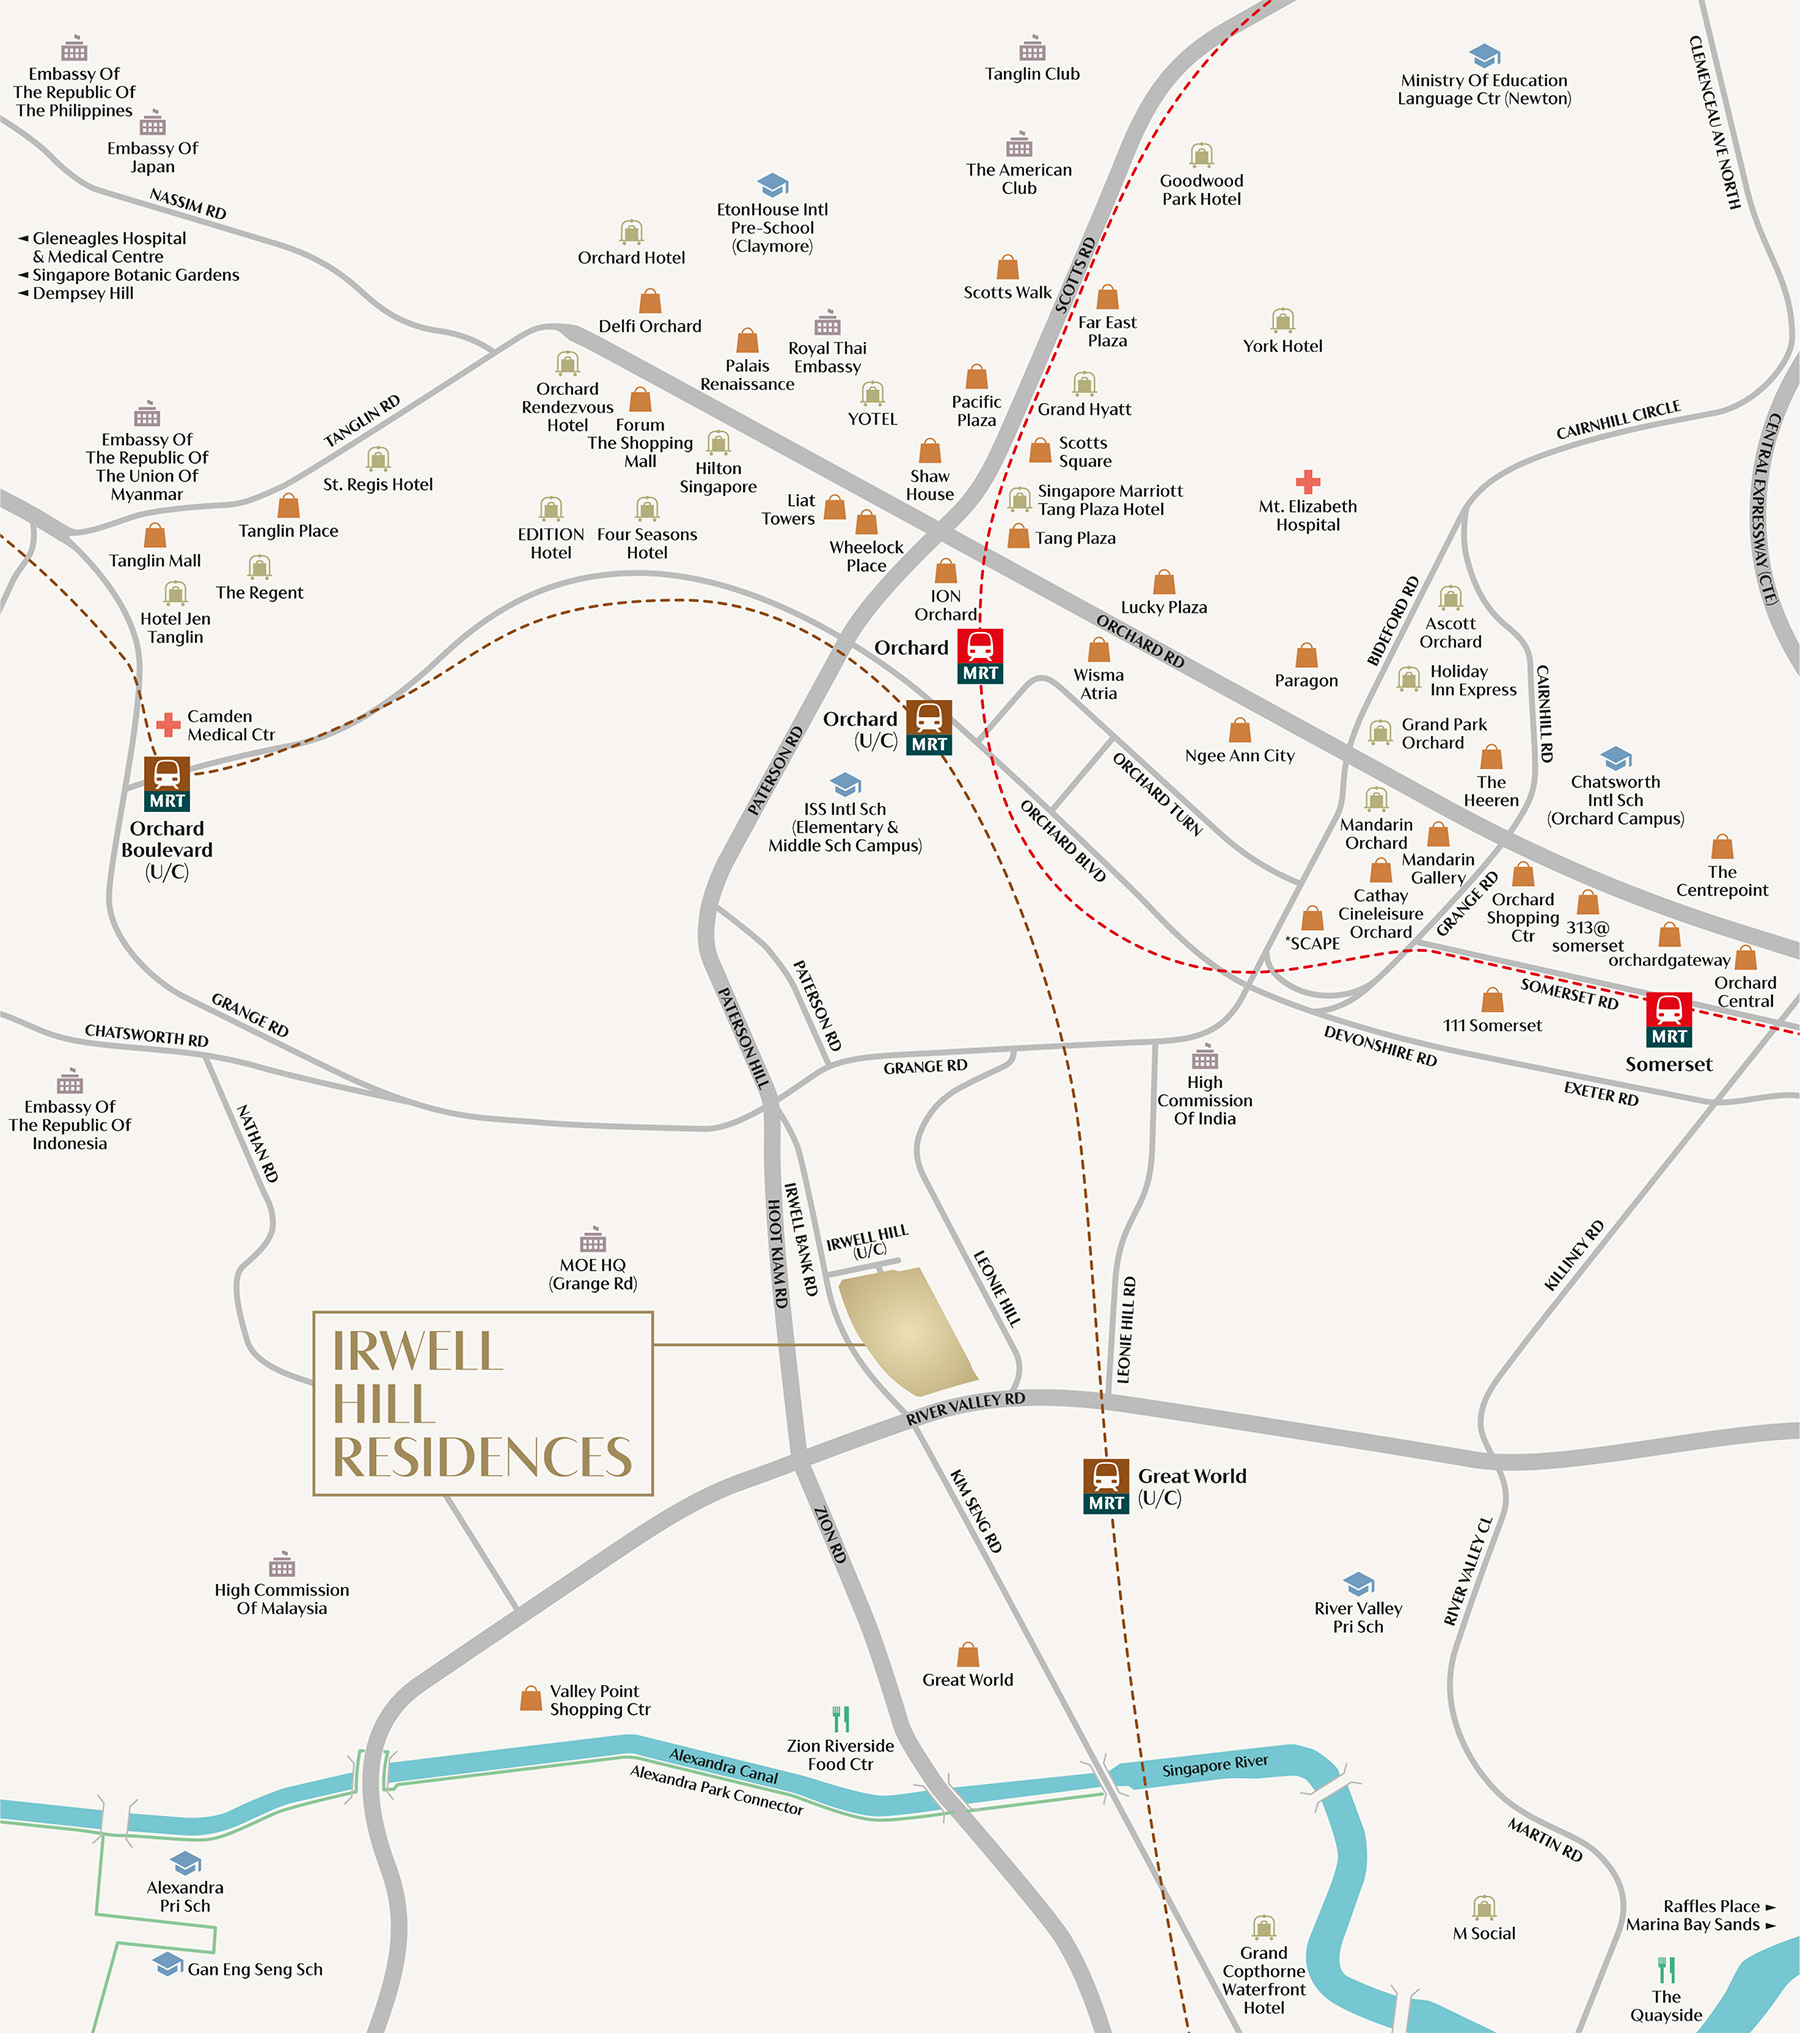 irwell-hill-residences-location-map